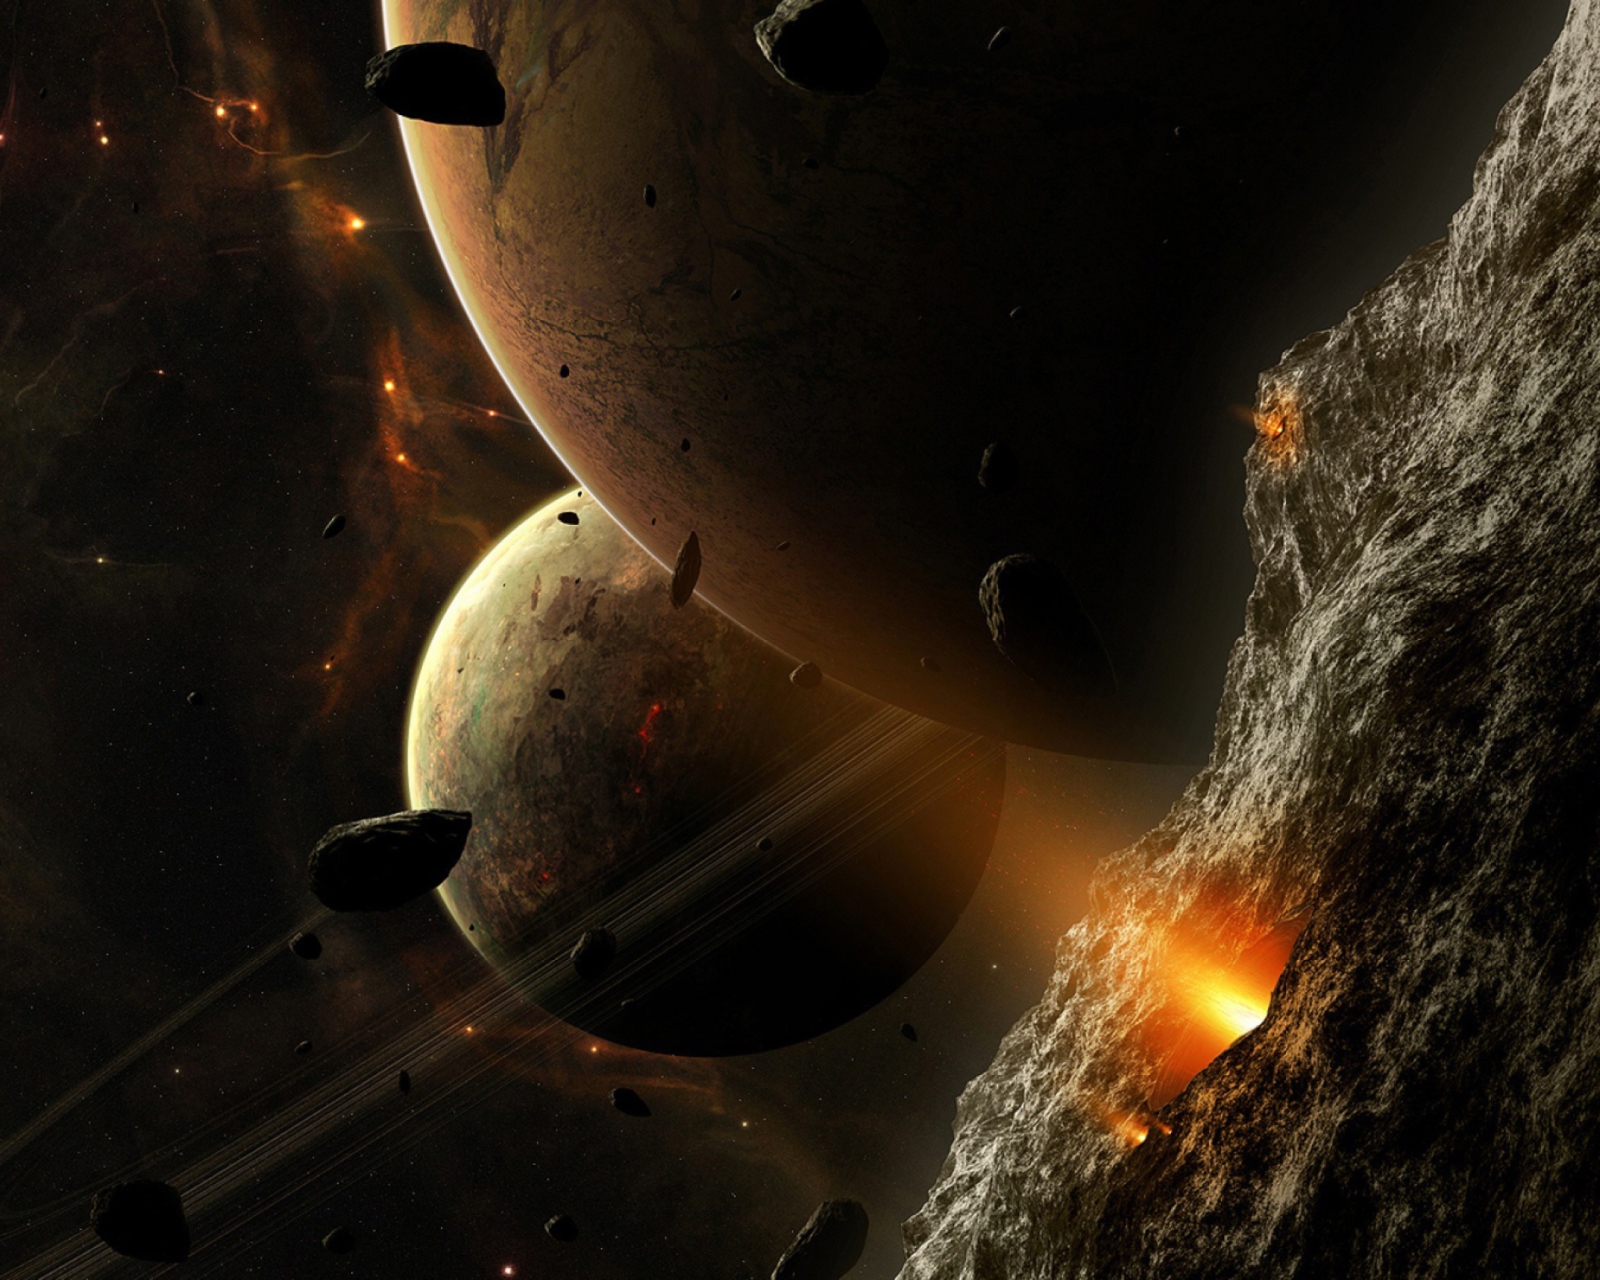 Asteroids And Planets wallpaper 1600x1280